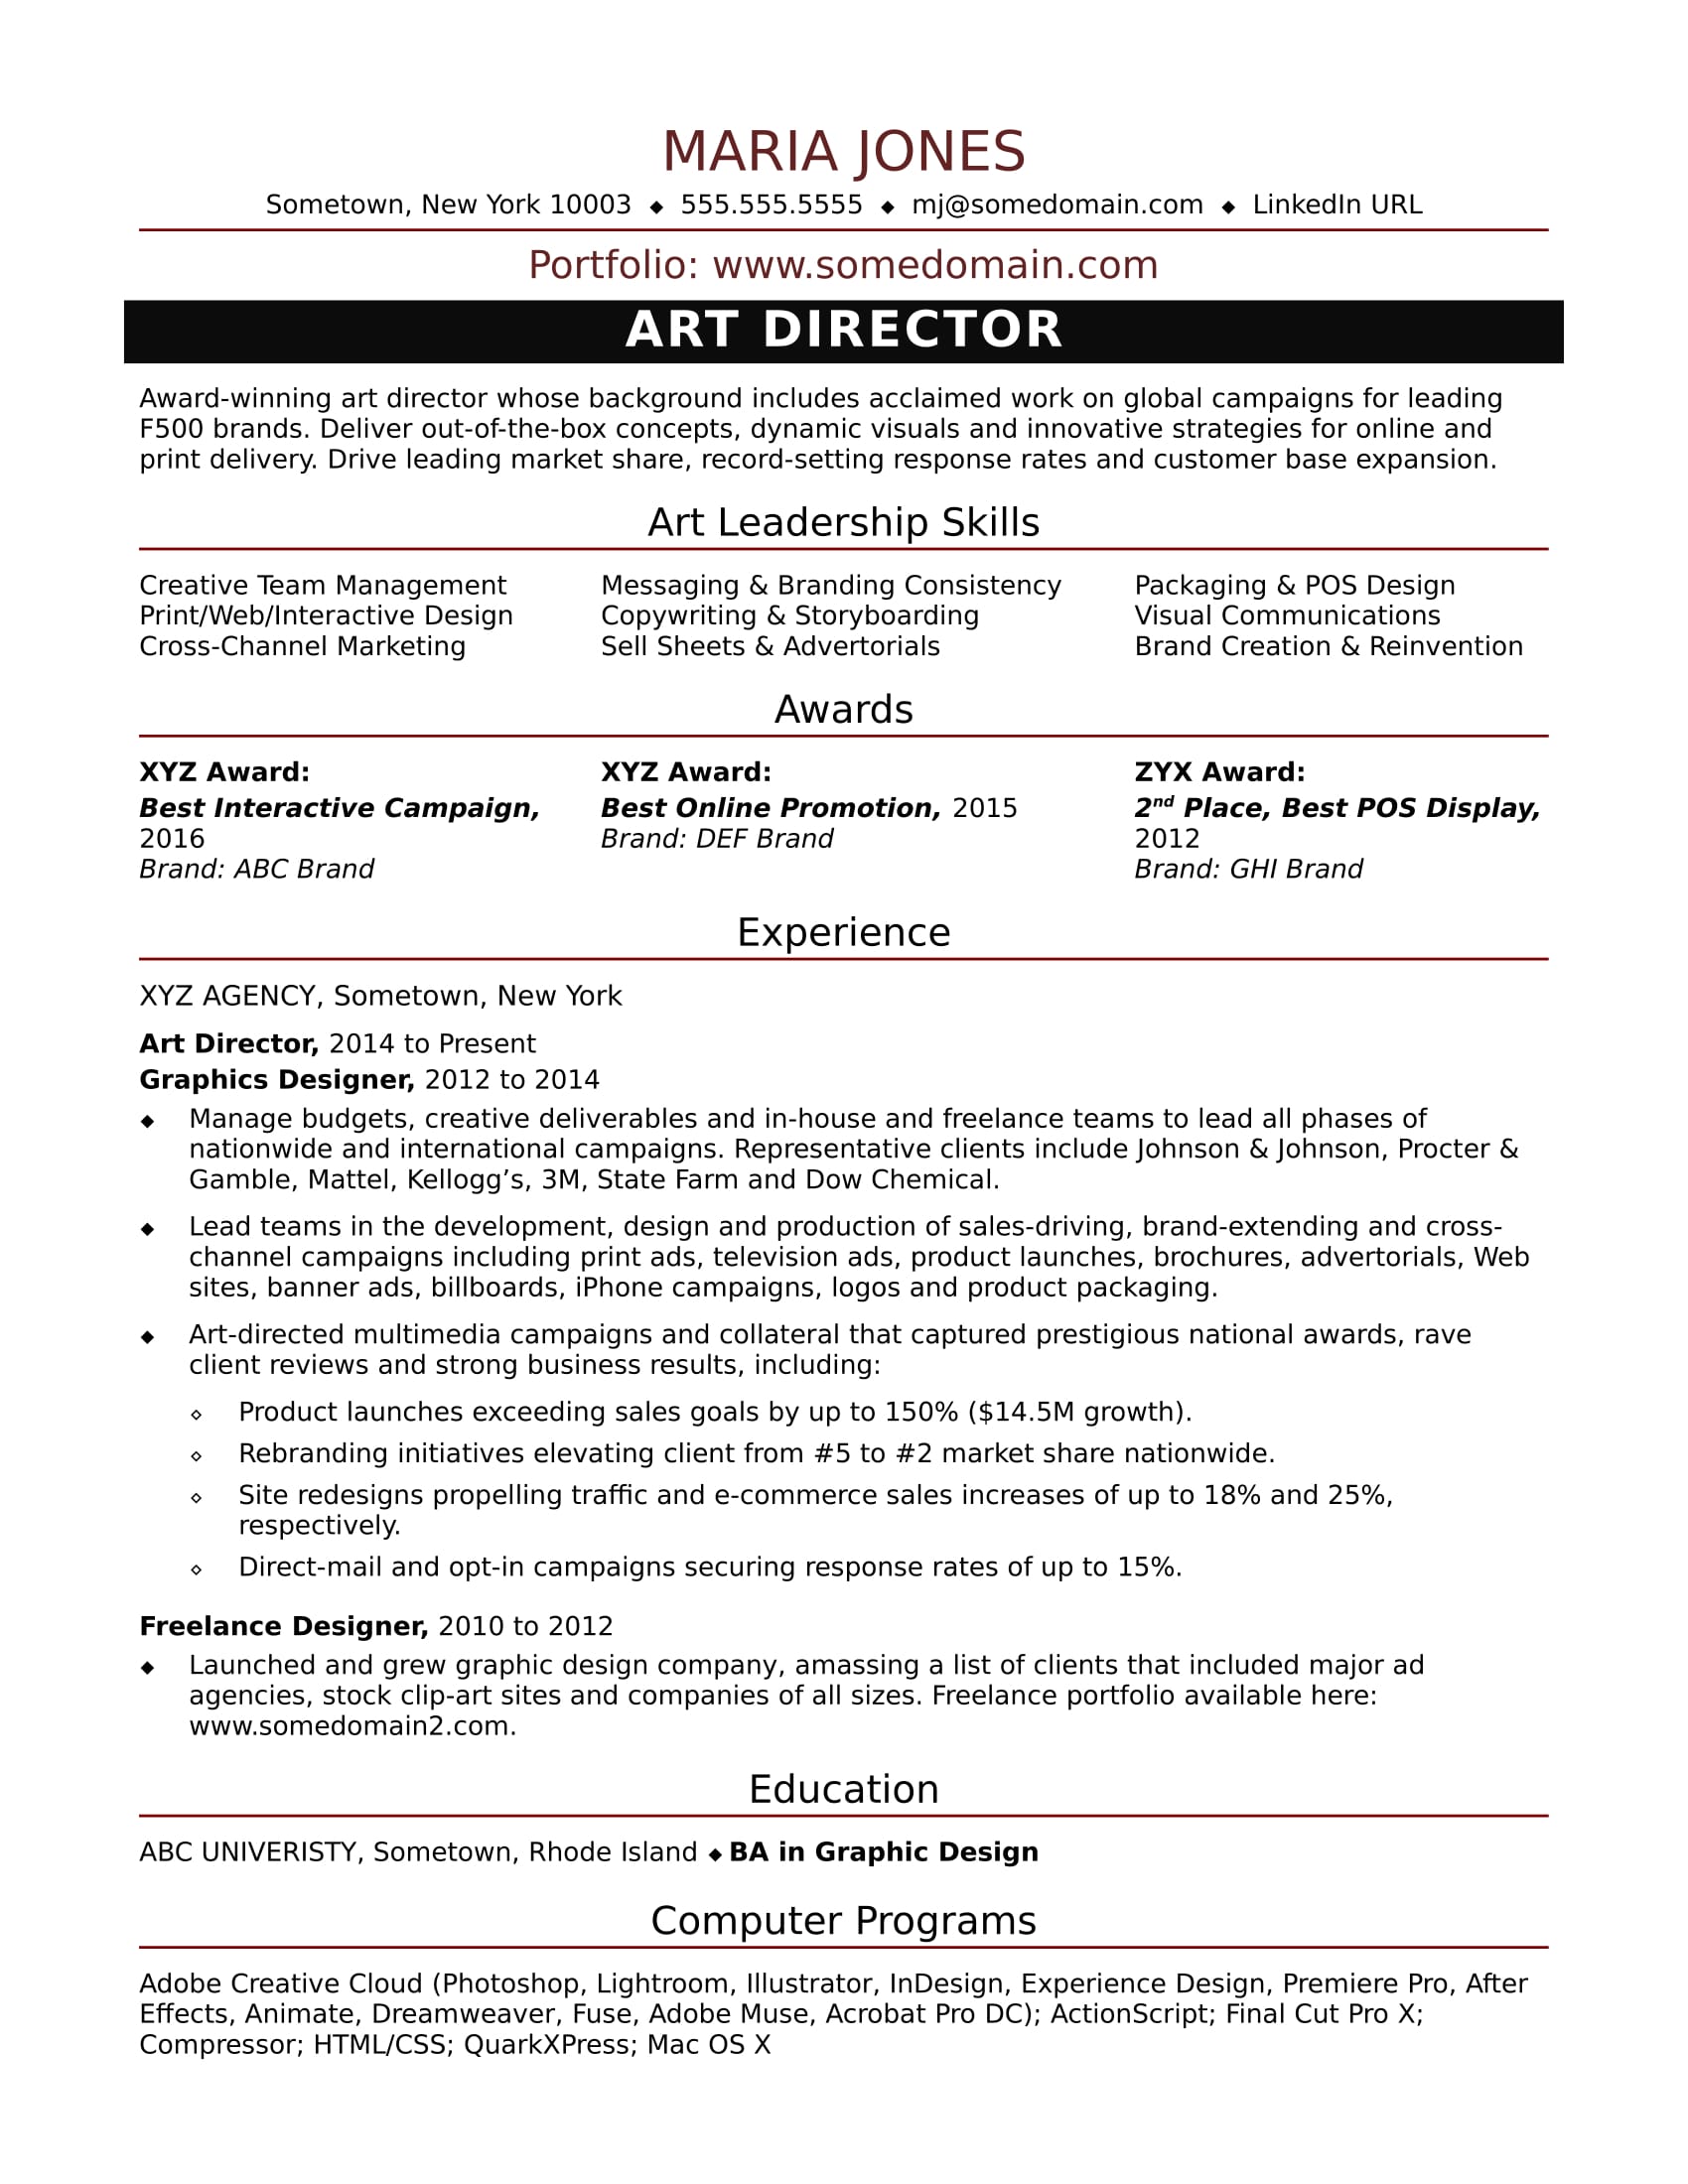 How To List Awards On Resume Sample